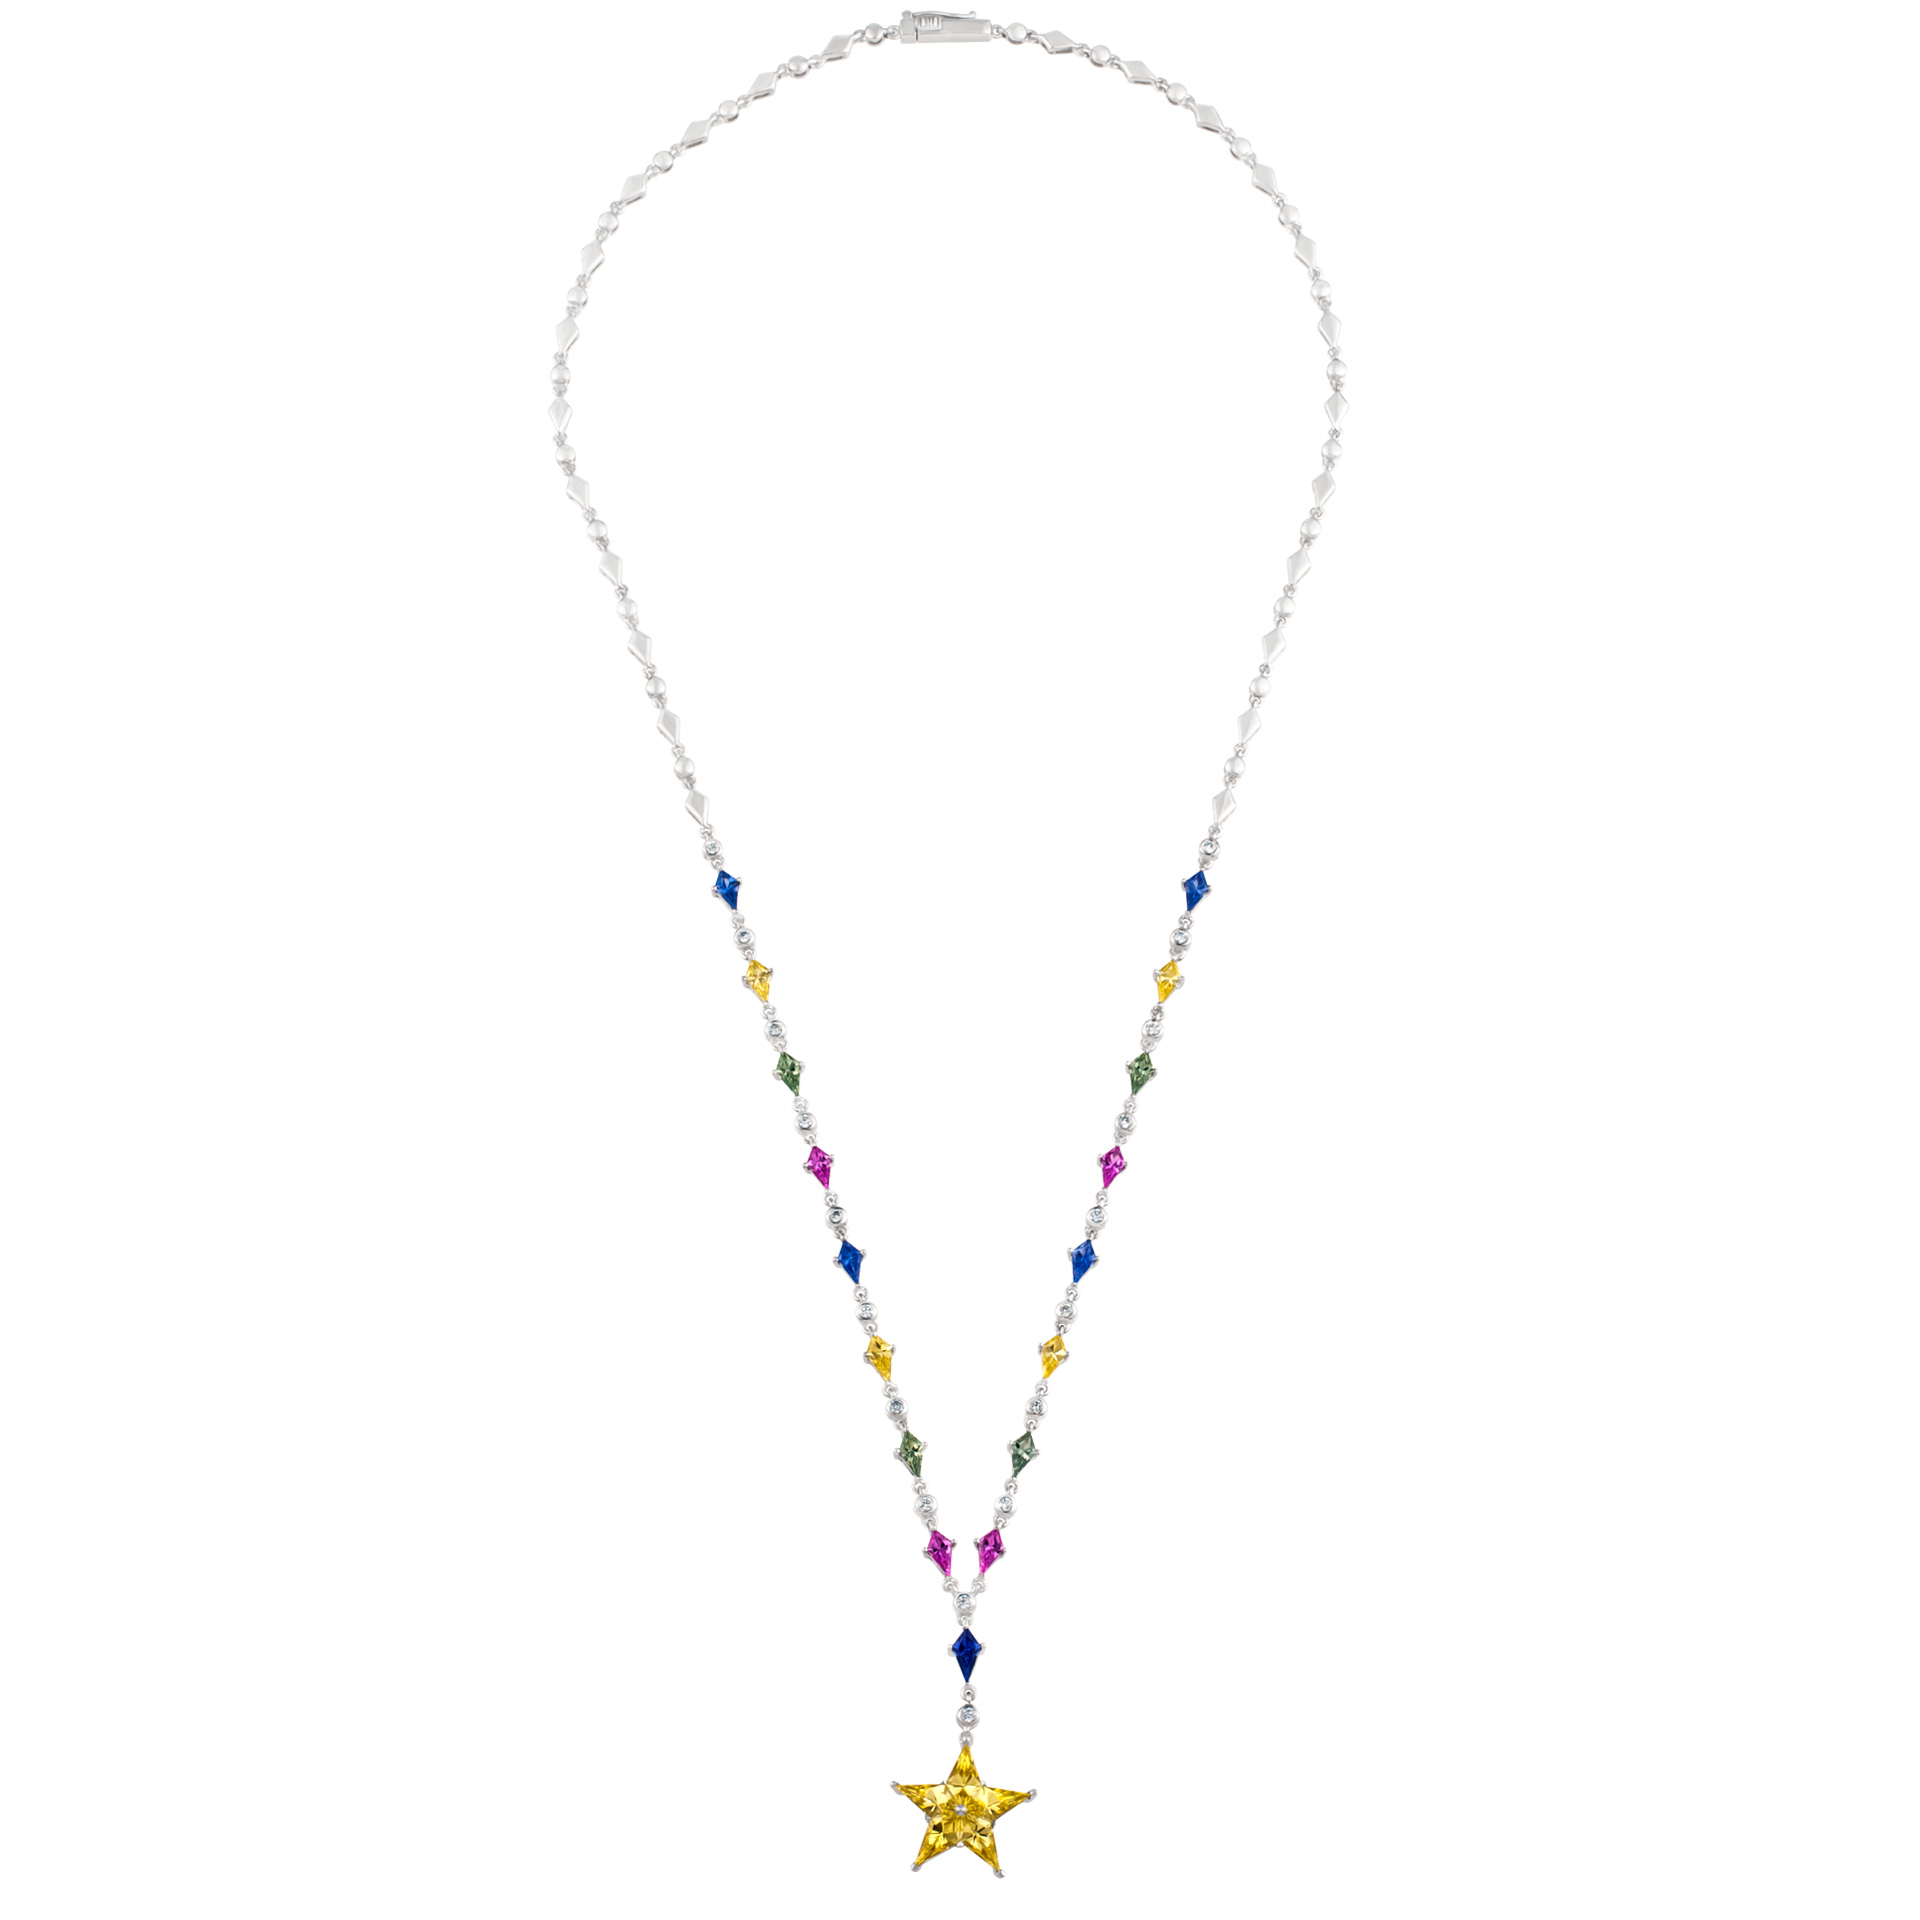 Multi colored sapphire necklace set in 18k white gold with single yellow sapphire star pendant,